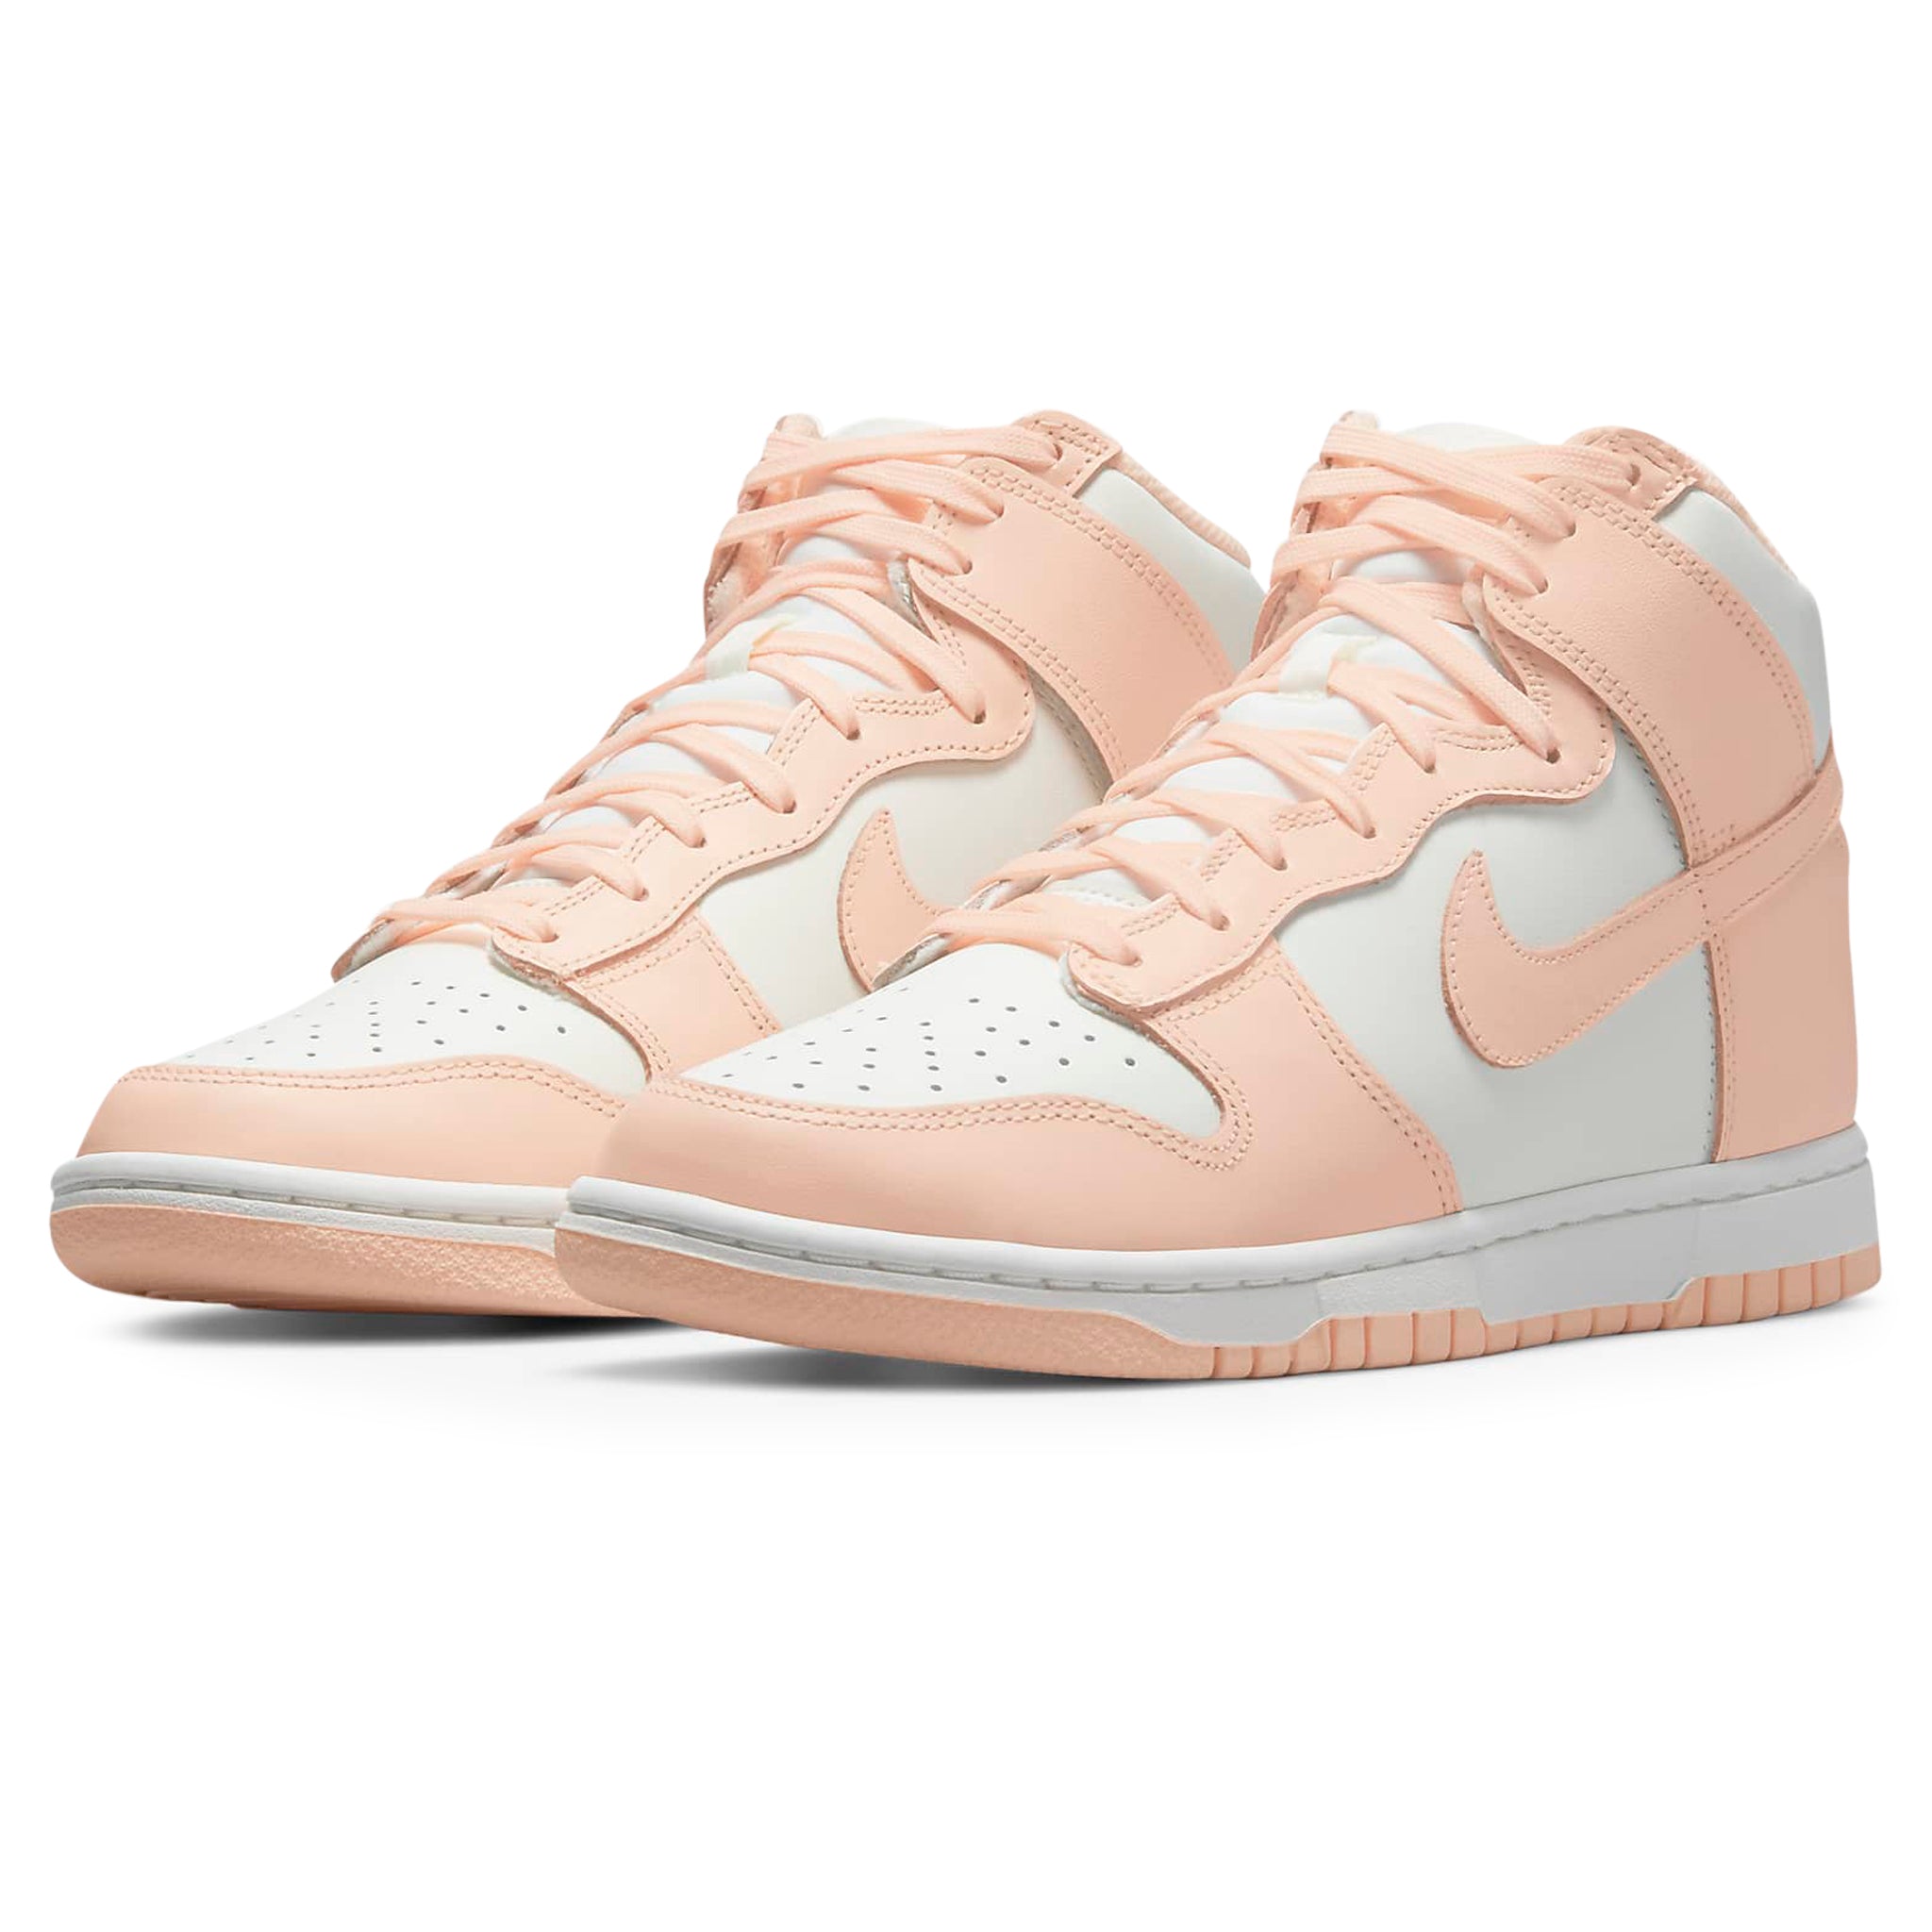 Front side view of Nike Dunk High Sail Crimson Tint (2021) Sneaker (W) DD1869-104